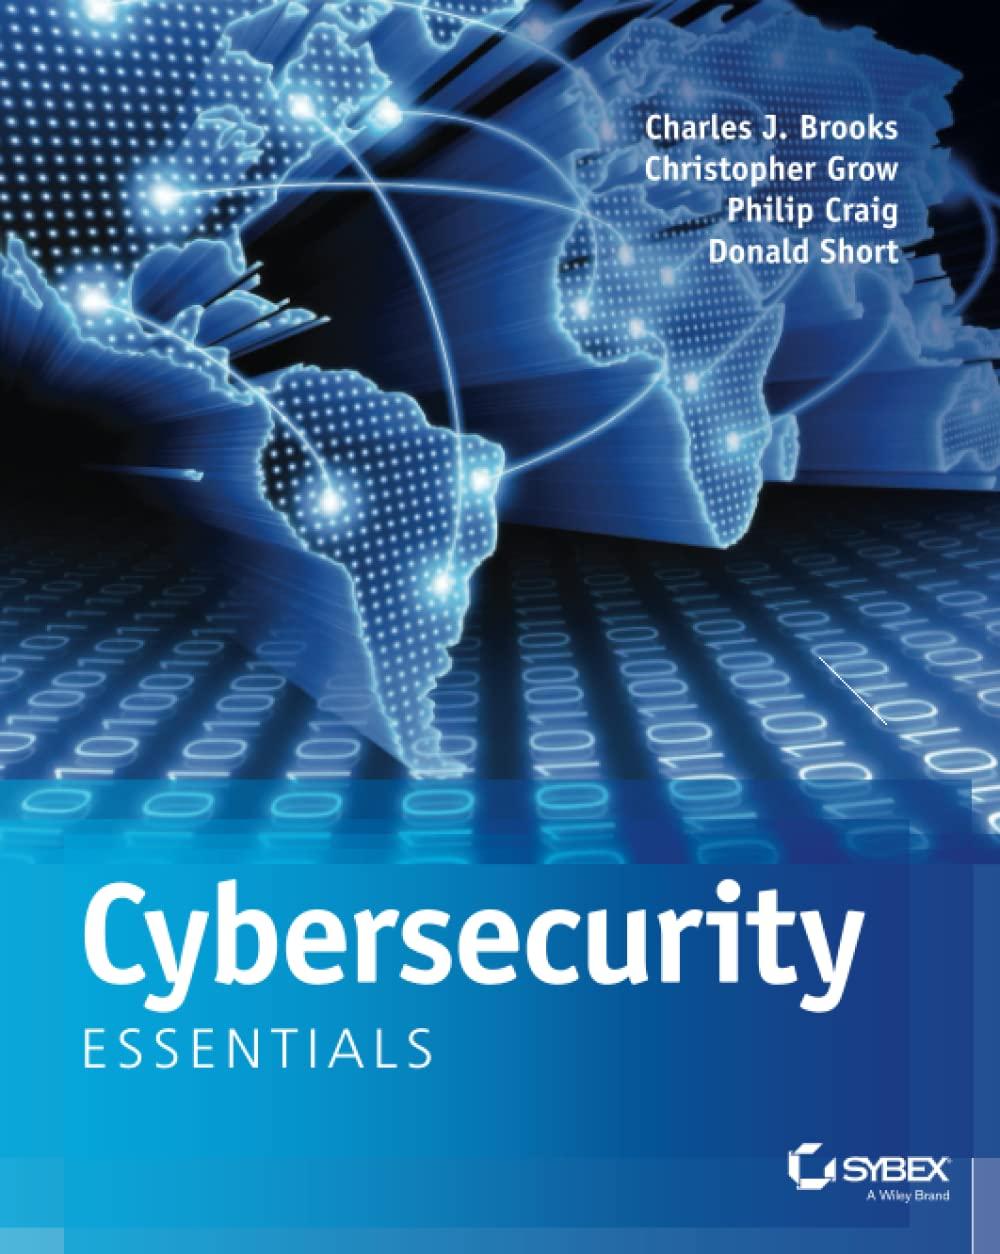 cybersecurity essentials 1st edition charles j. brooks, christopher grow, philip a. craig, donald short